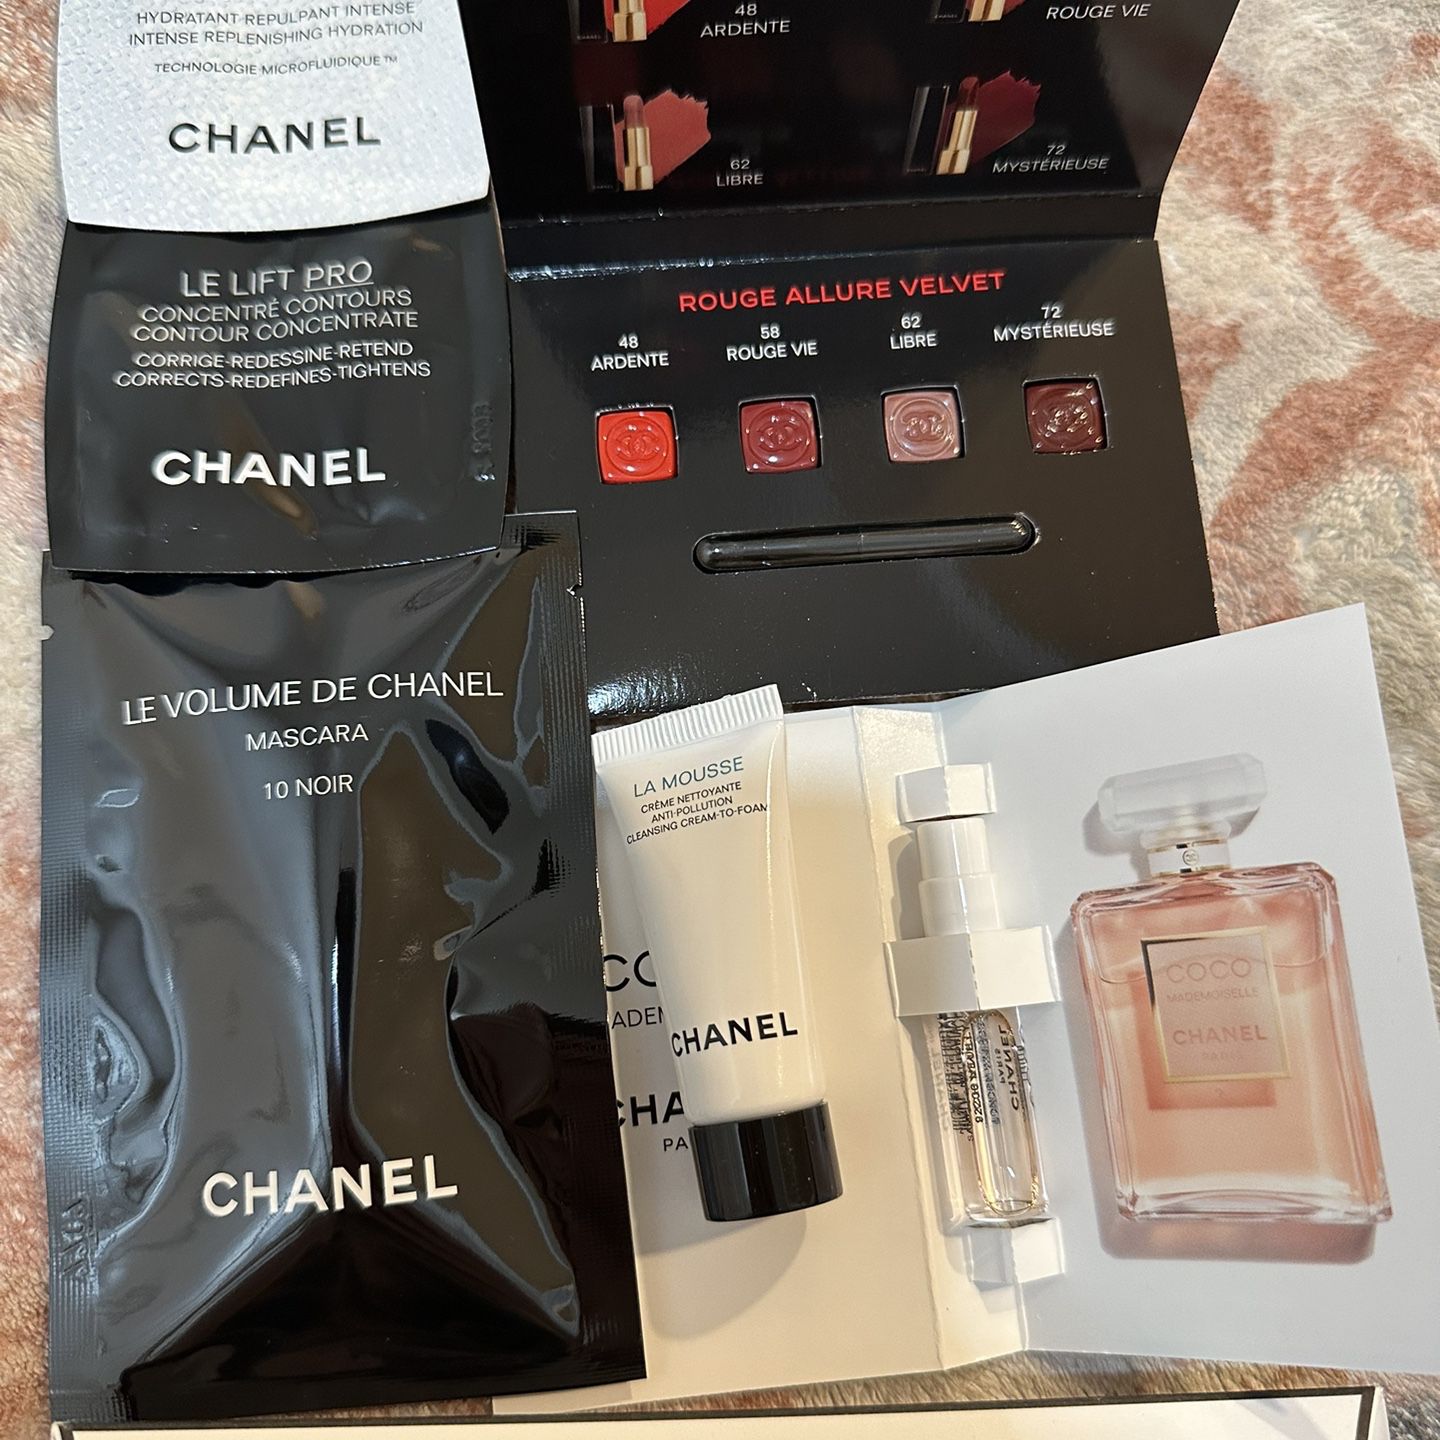 Chanel Makeup Bag for Sale in Long Beach, CA - OfferUp